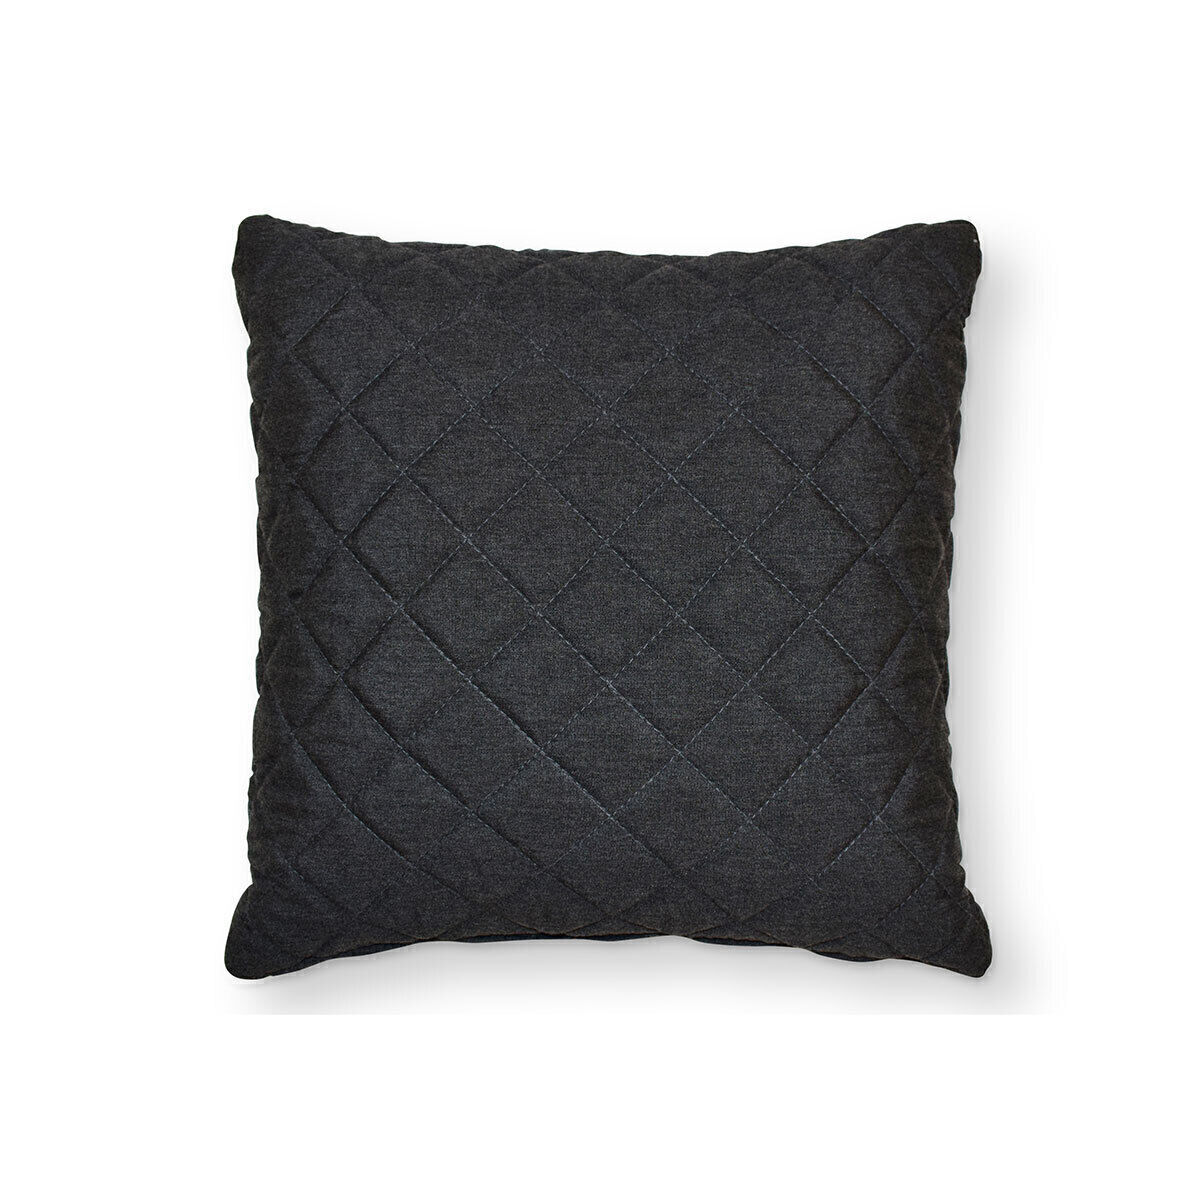 Maze - Pair of Outdoor Fabric Quilted Scatter Cushion (40x40cm) - Charcoal product image